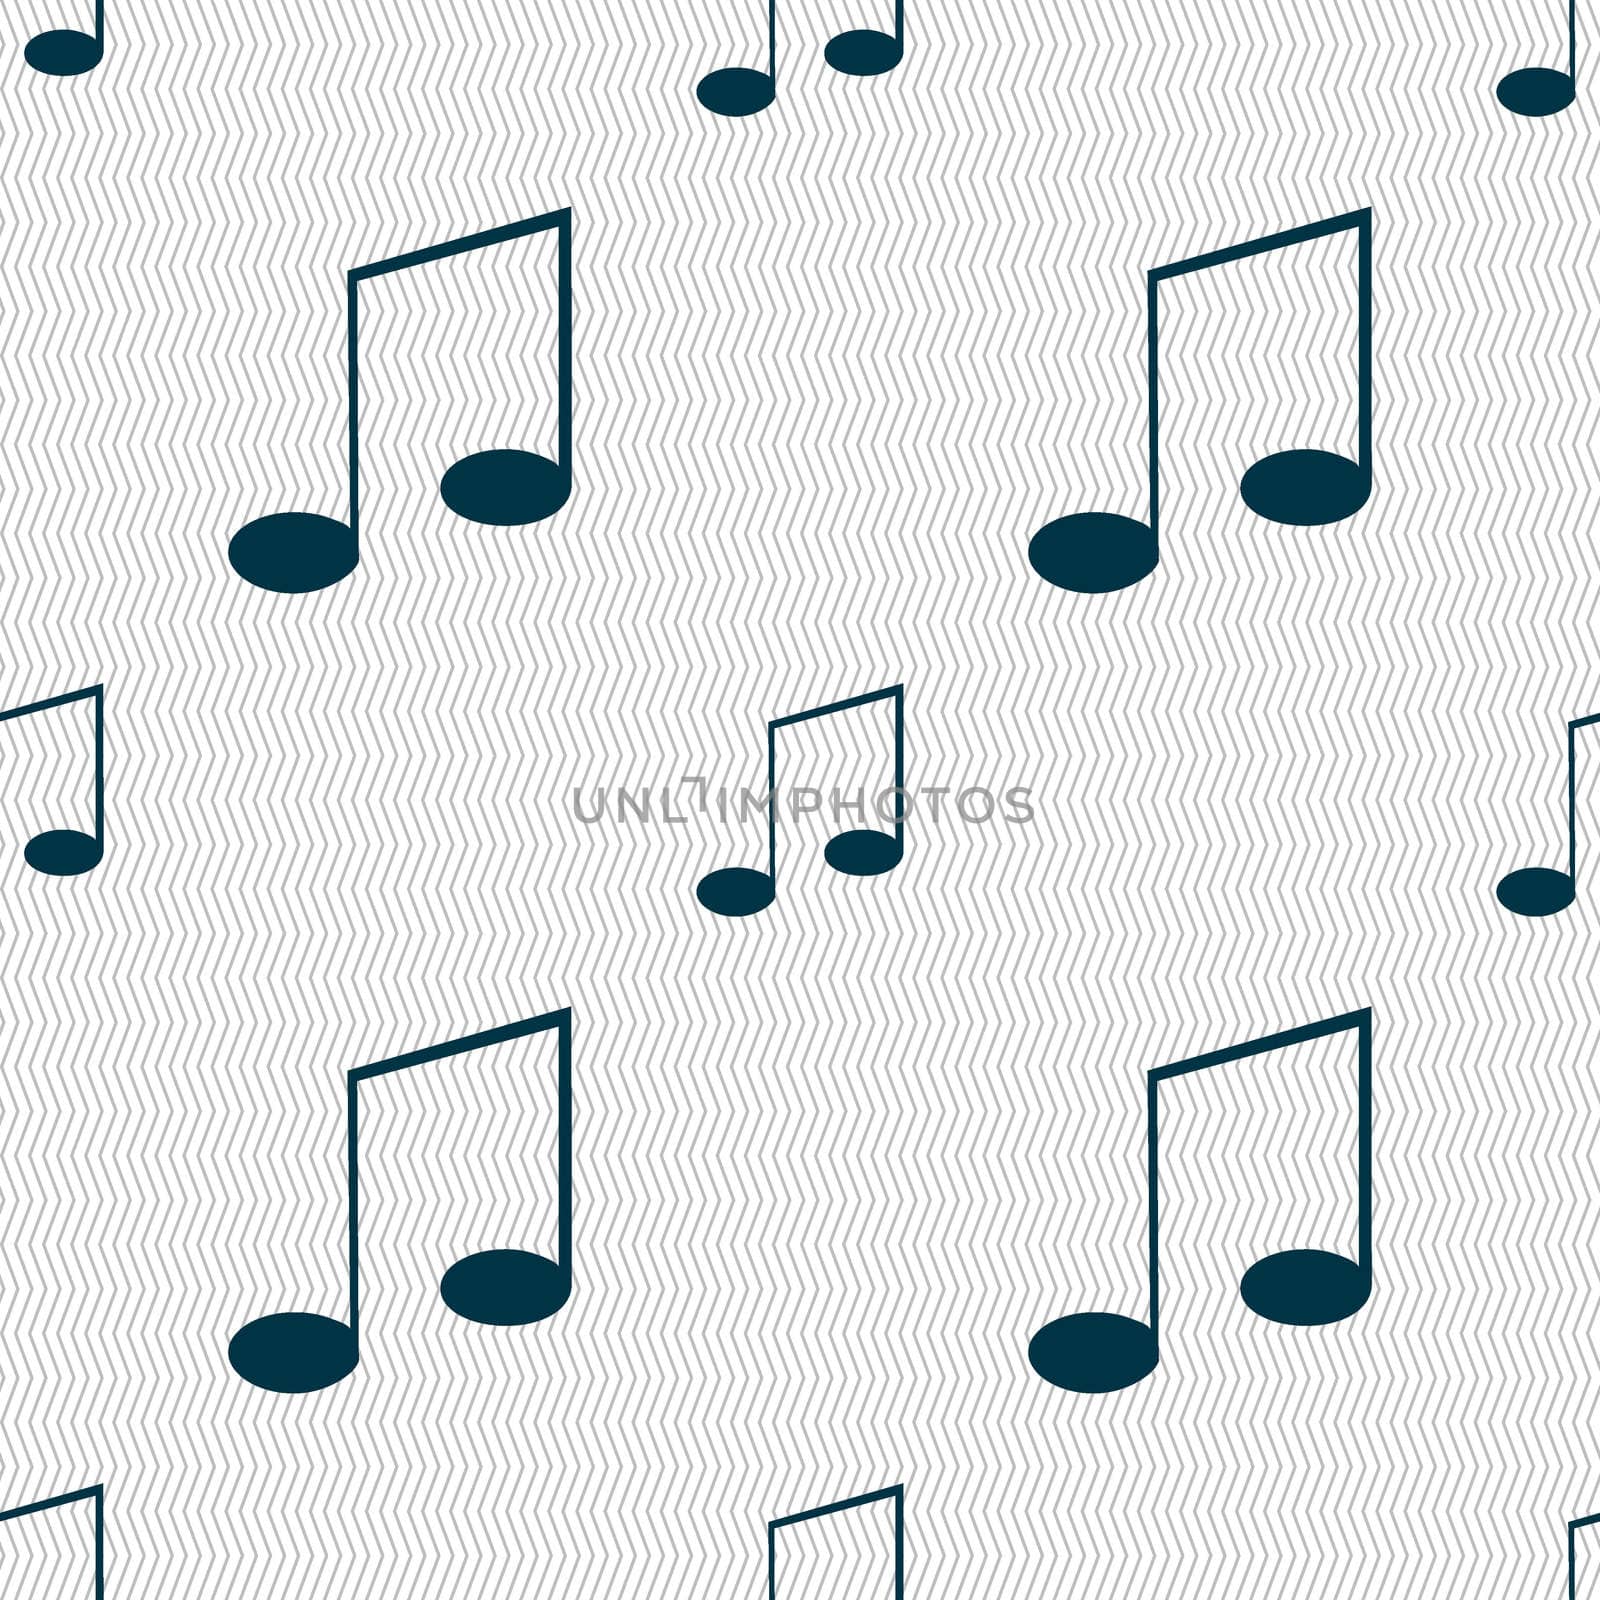 Music note sign icon. Musical symbol. Seamless abstract background with geometric shapes. illustration